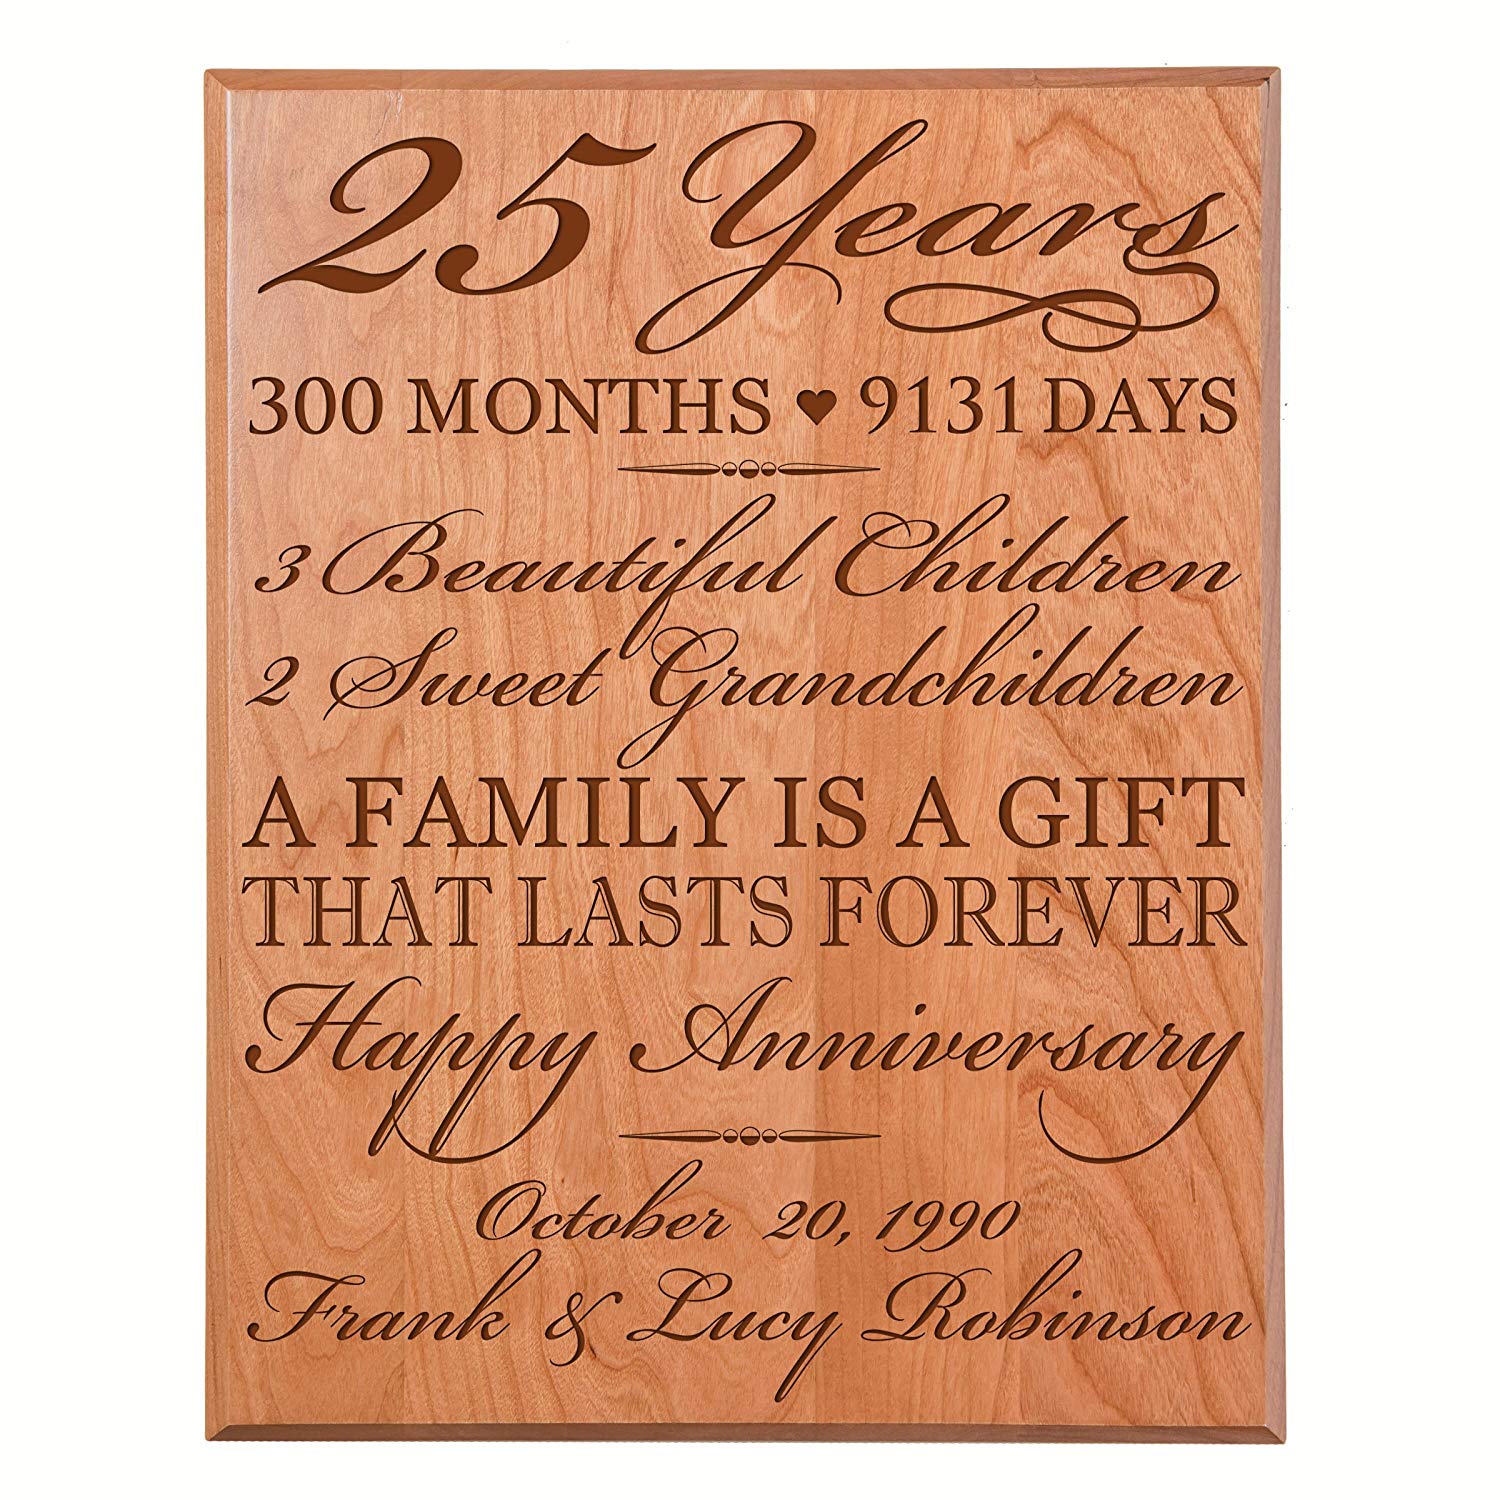 Wedding Anniversary Gifts by Year: Traditional & Modern Themes